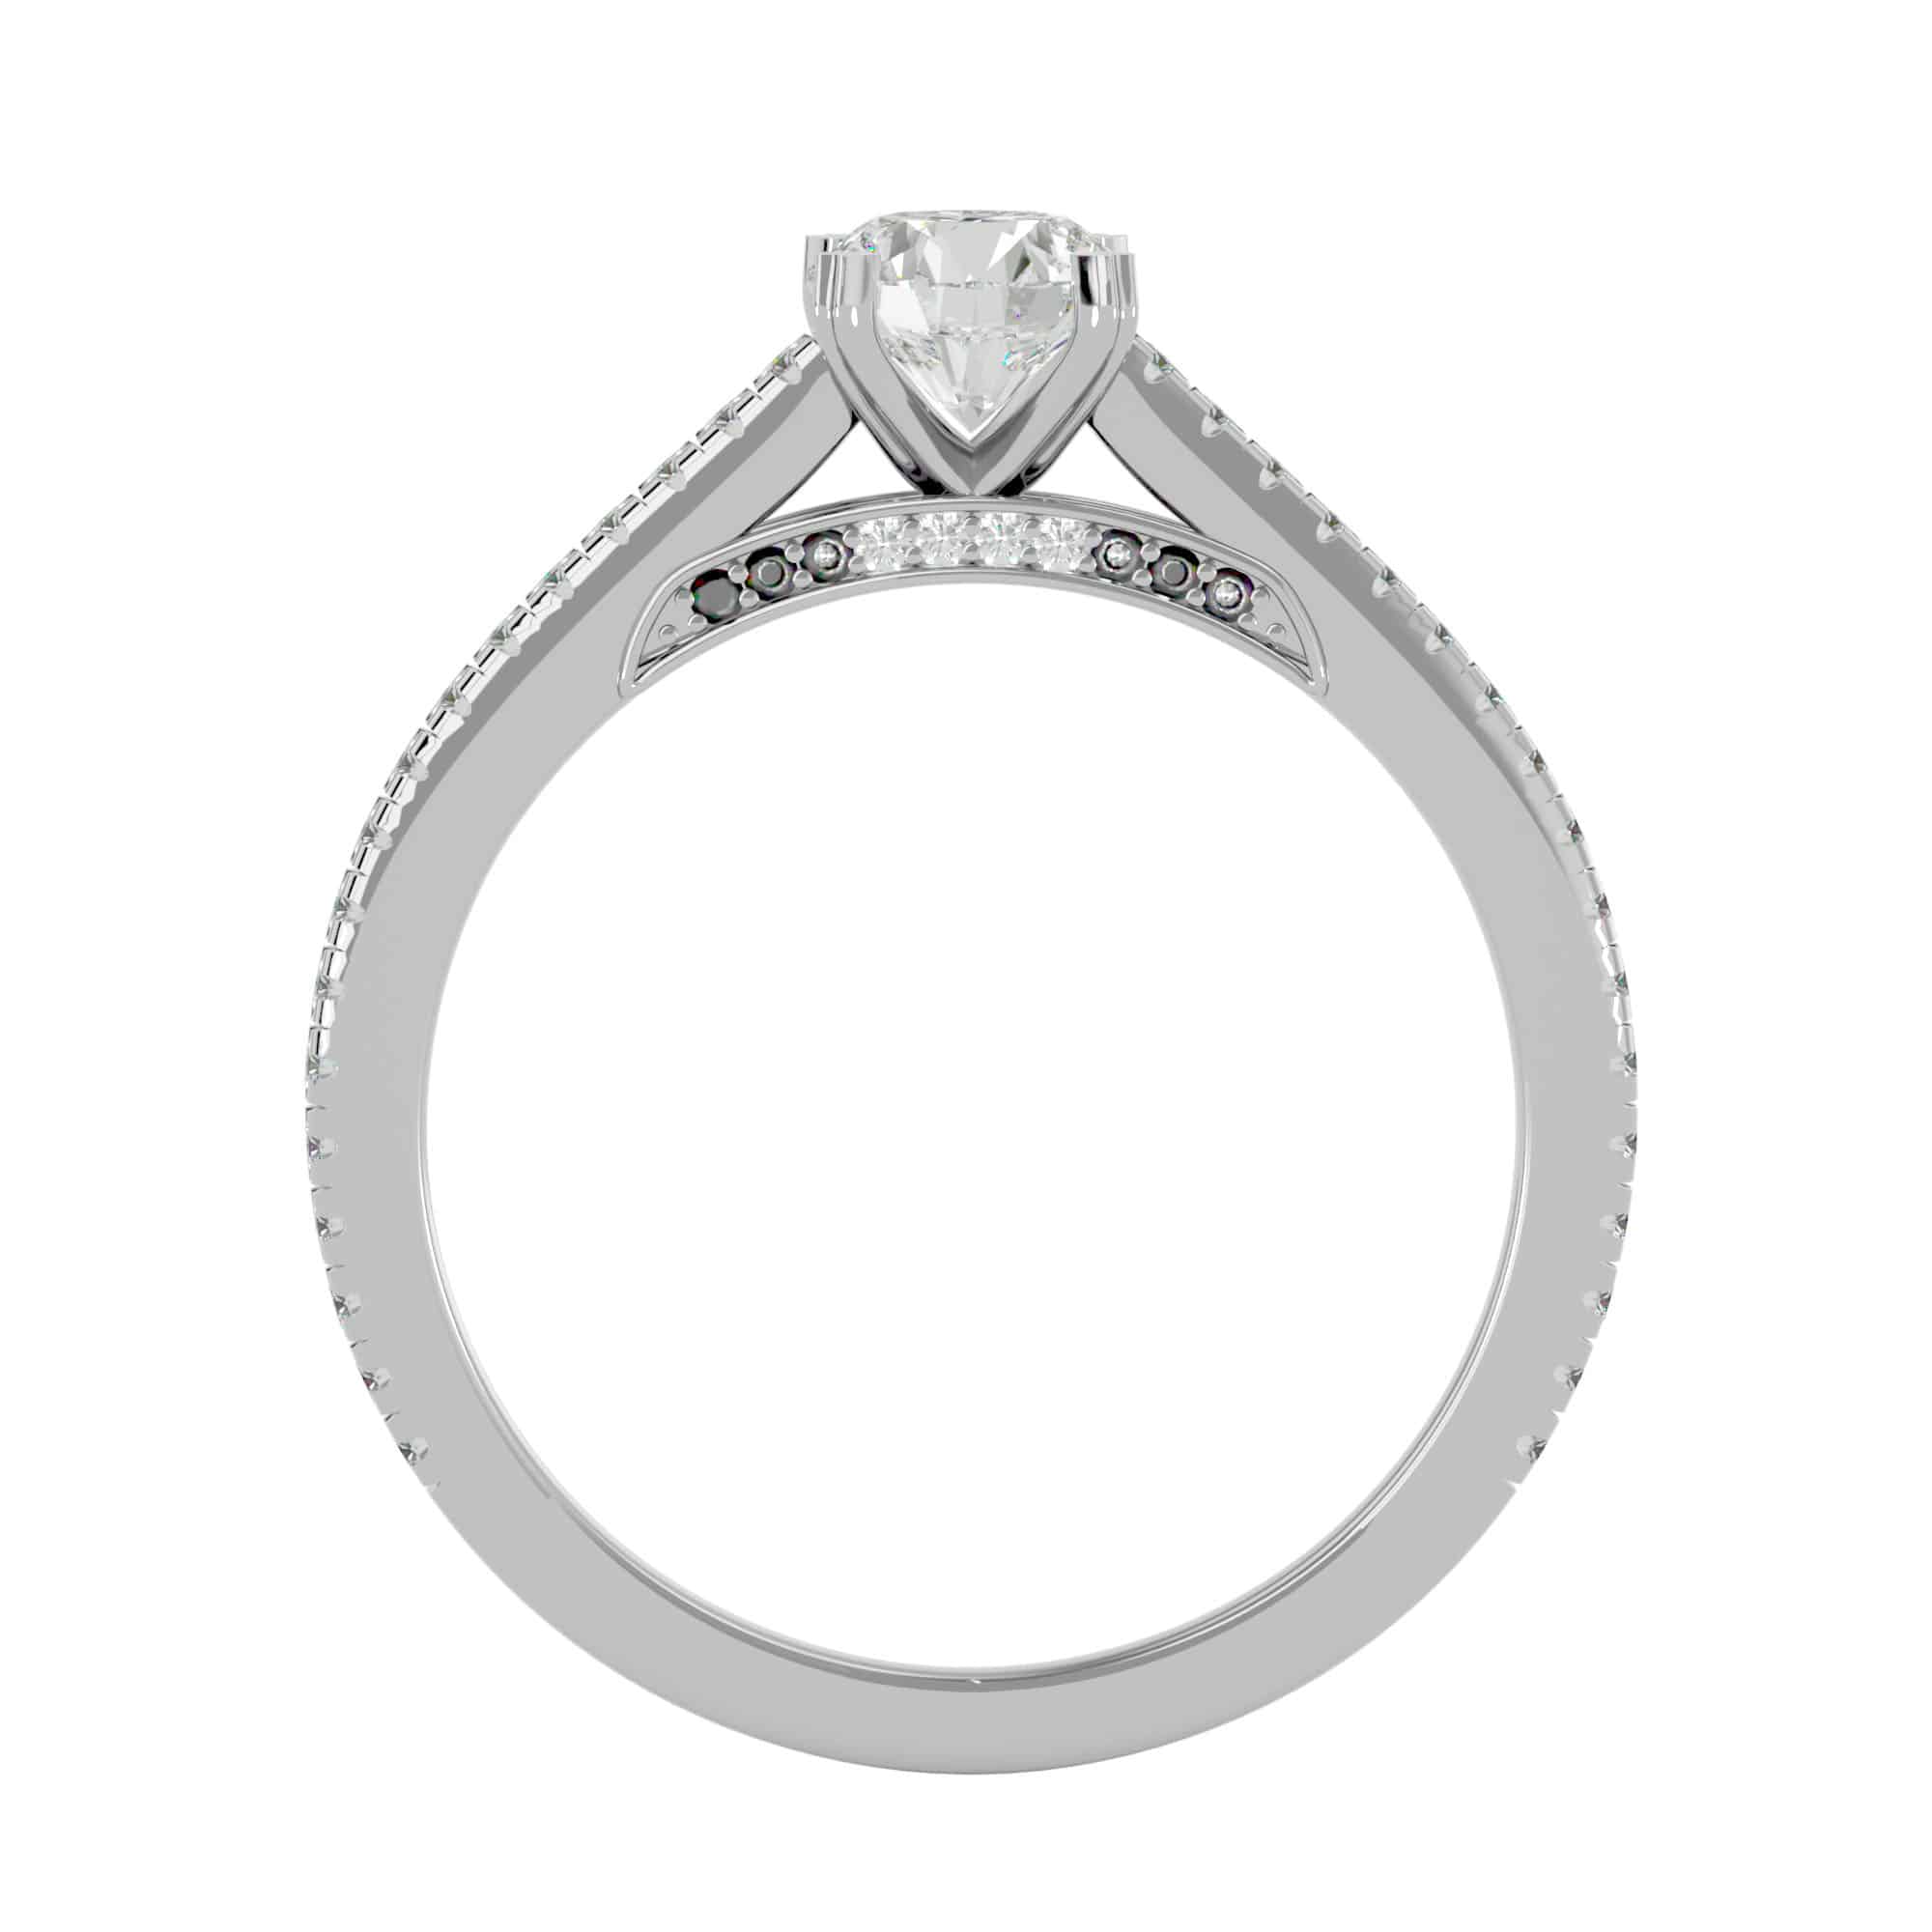 Lucy Diamond Engagement Ring Petite Pave Setting